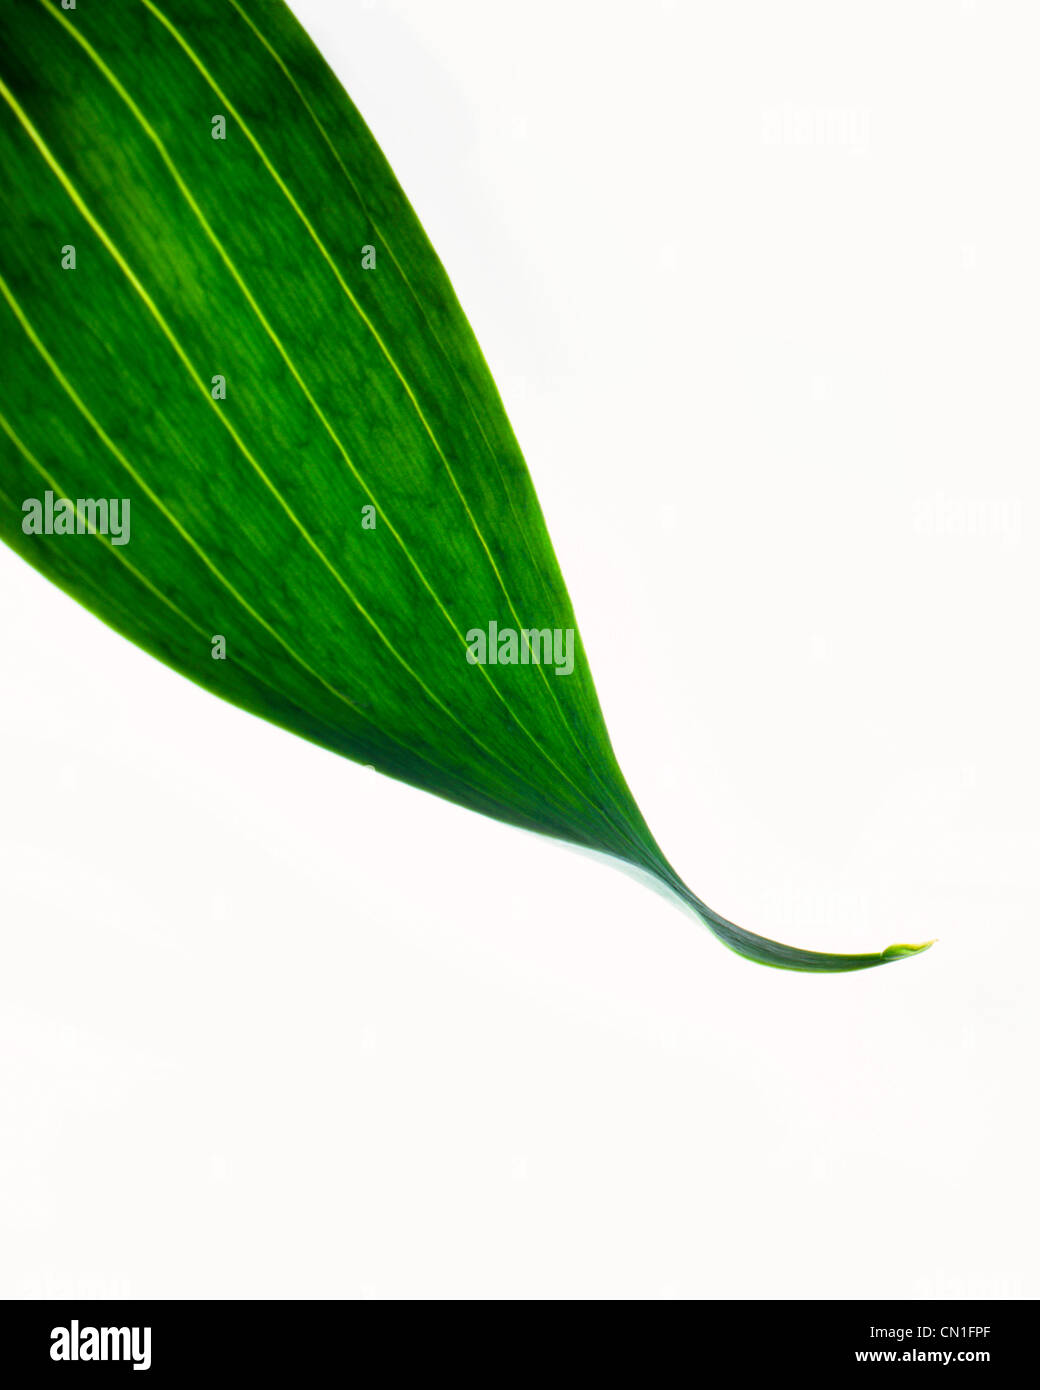 Tropical Leaf with Water Droplet Stock Photo